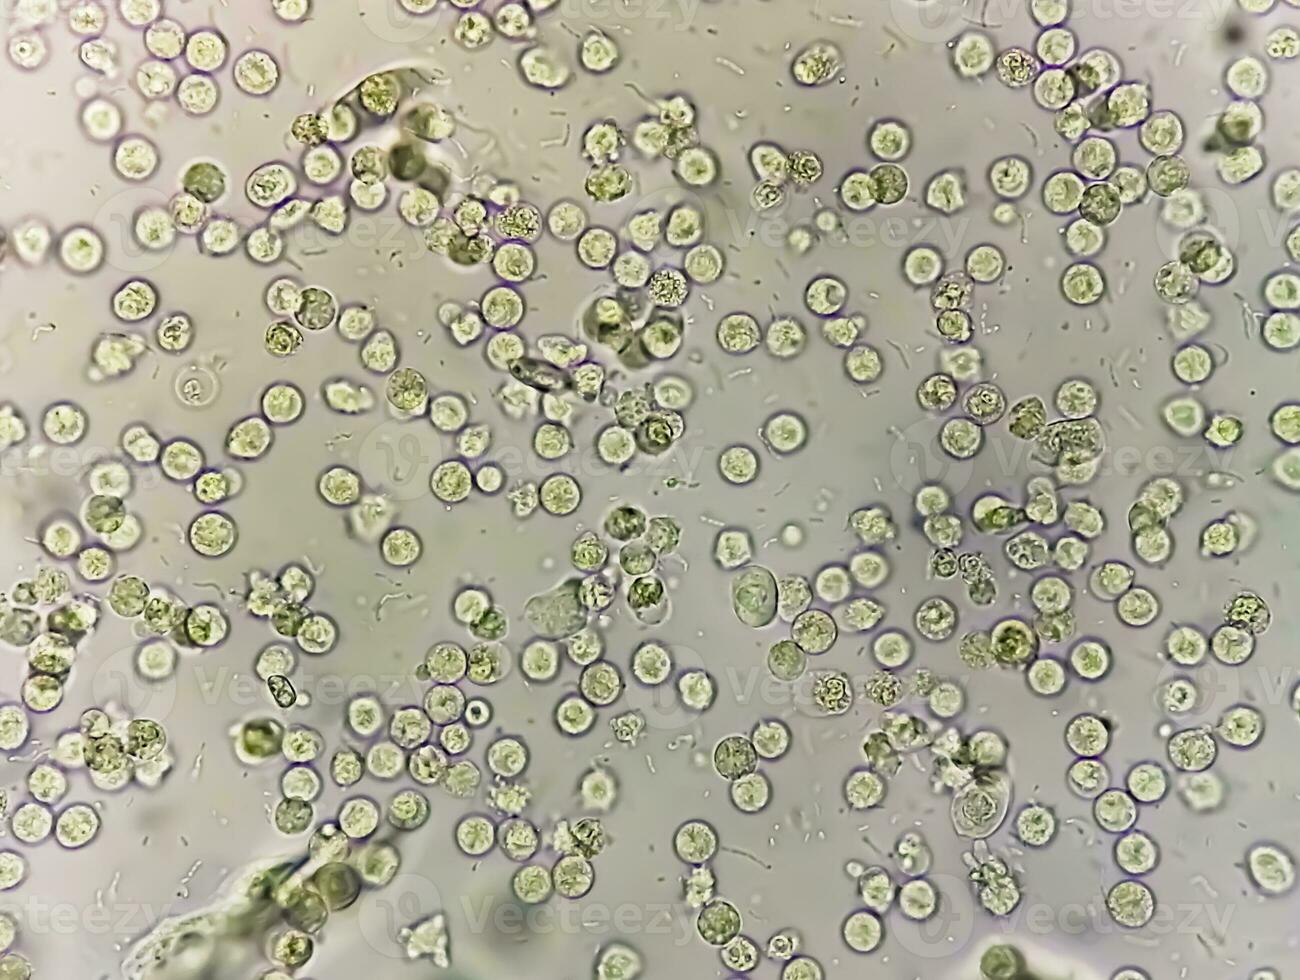 Pyuria or leukocyturia is the condition of urine containing white blood cells or pus. It can be a sign of a bacterial urinary tract infection photo